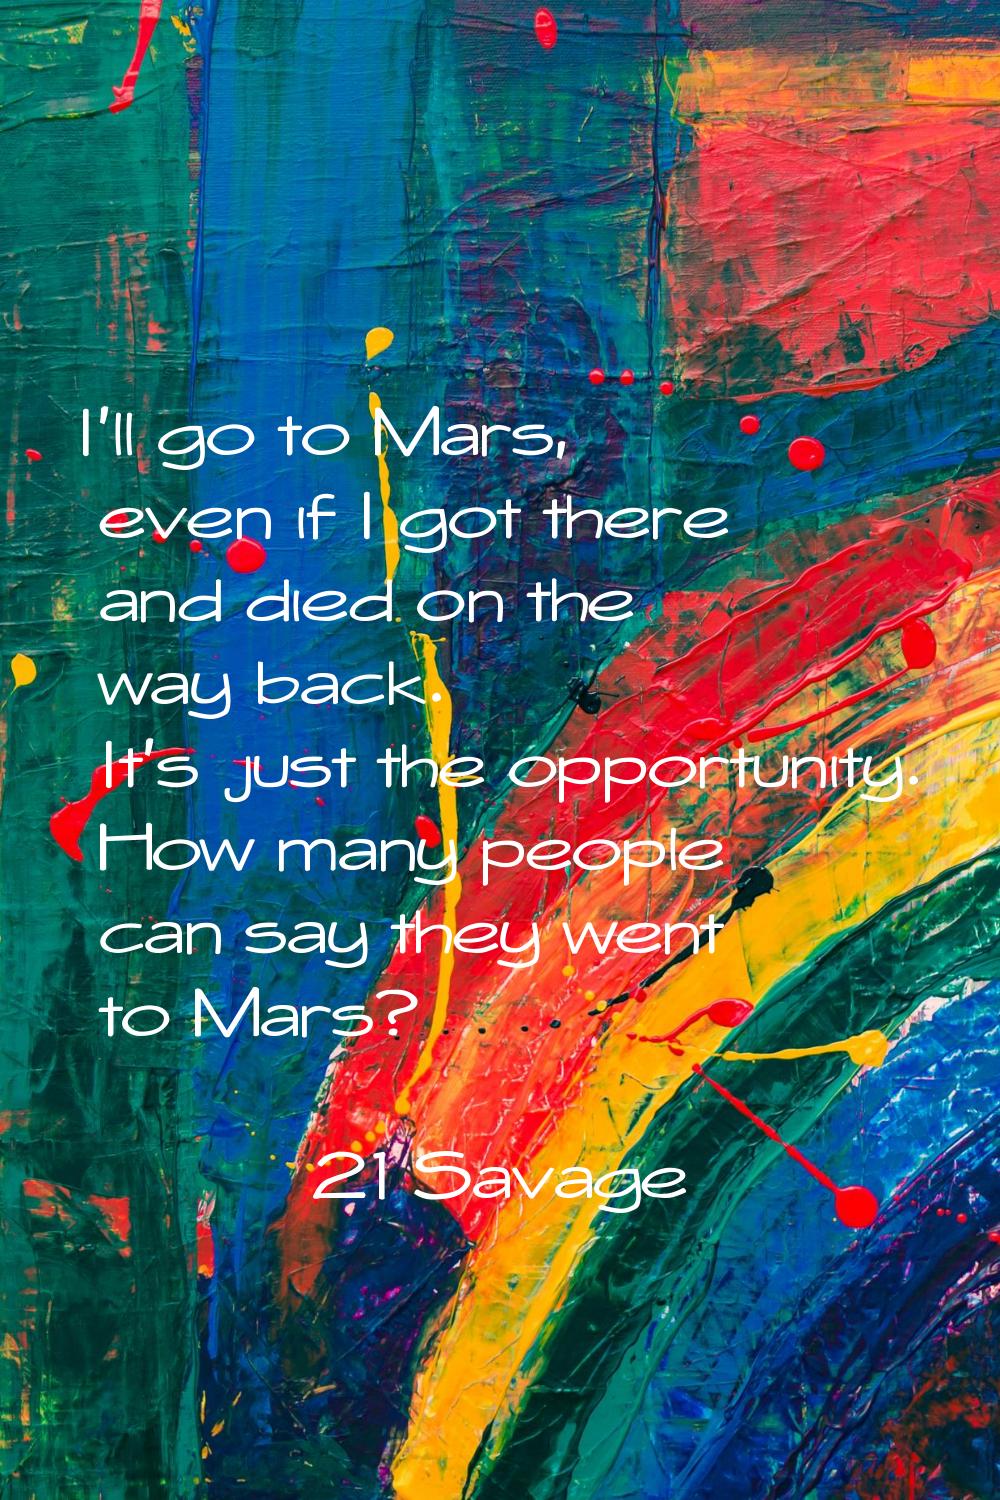 I'll go to Mars, even if I got there and died on the way back. It's just the opportunity. How many 